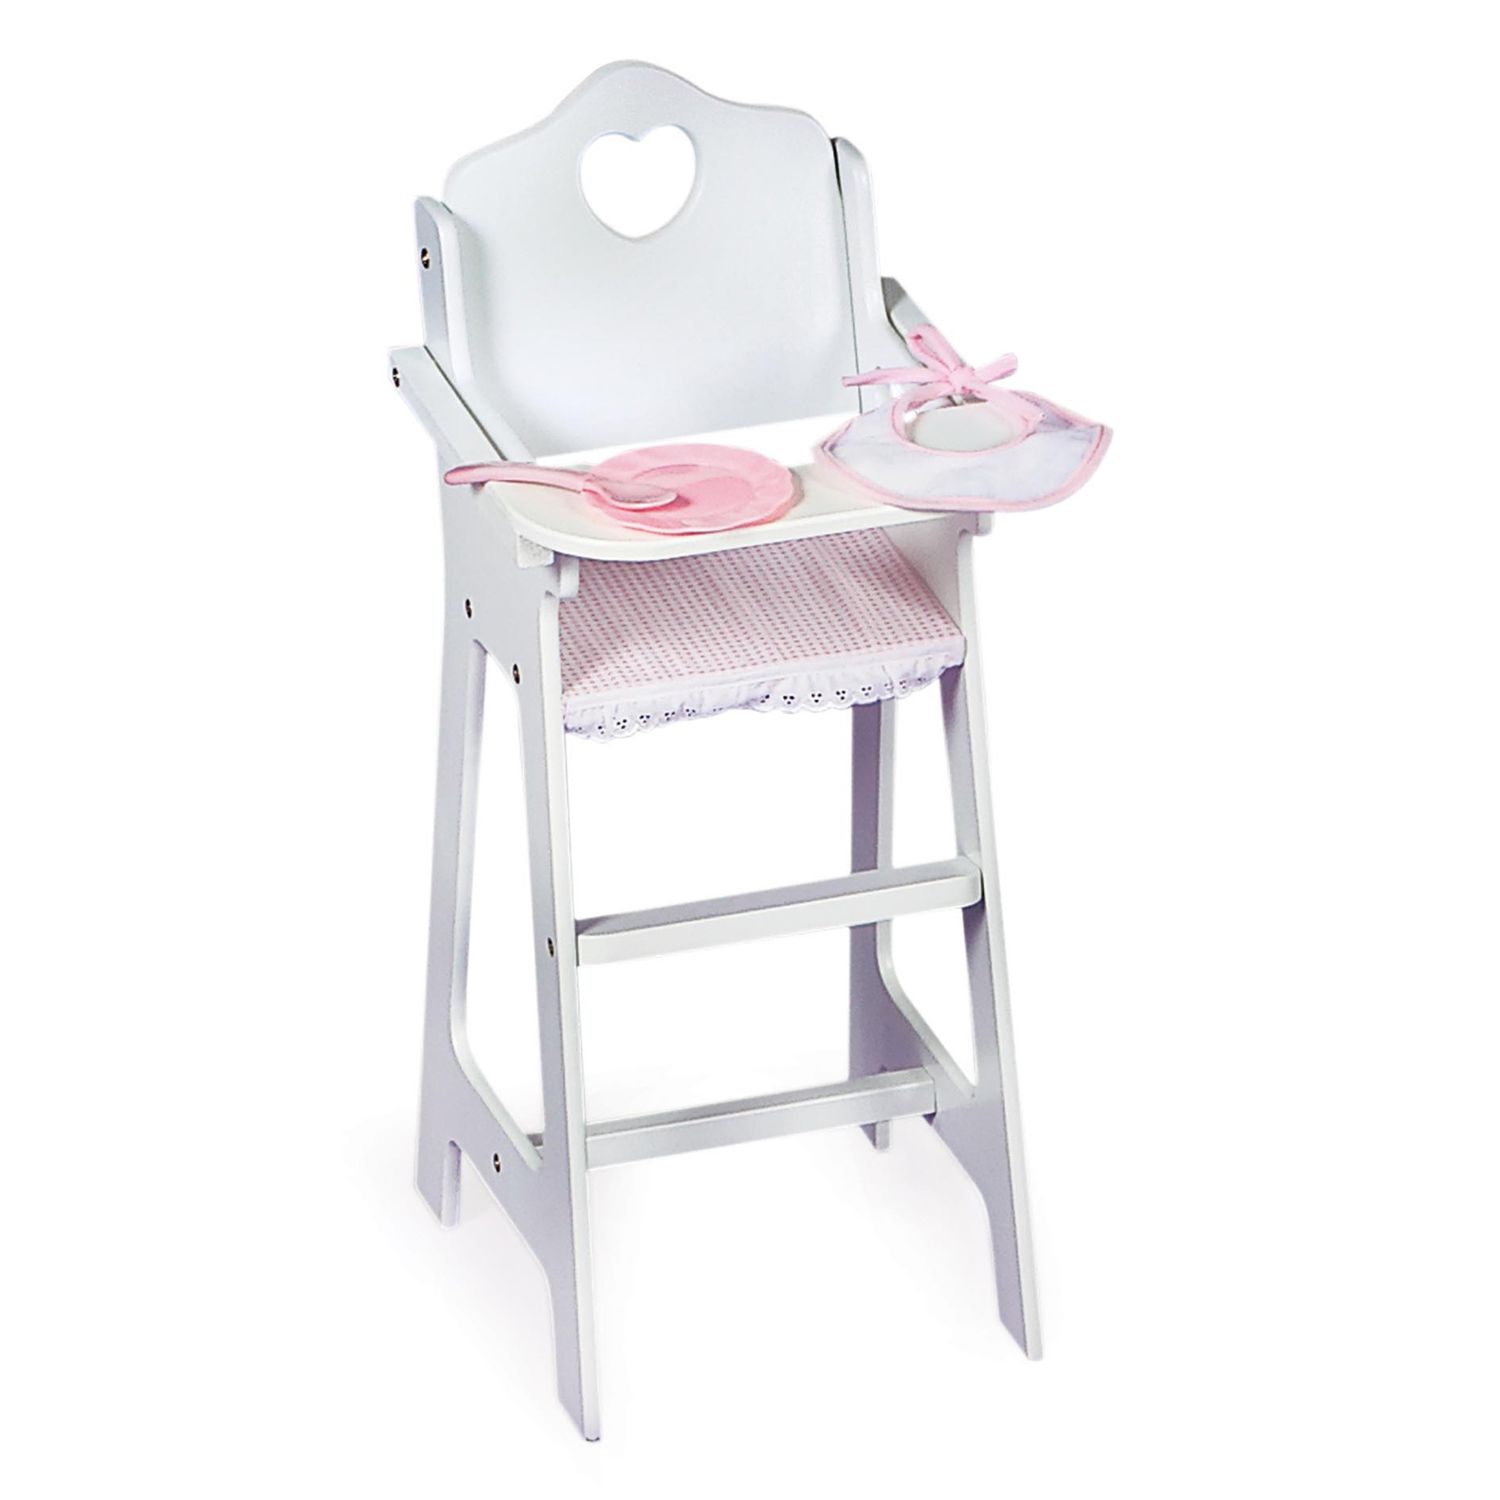 toy high chair set